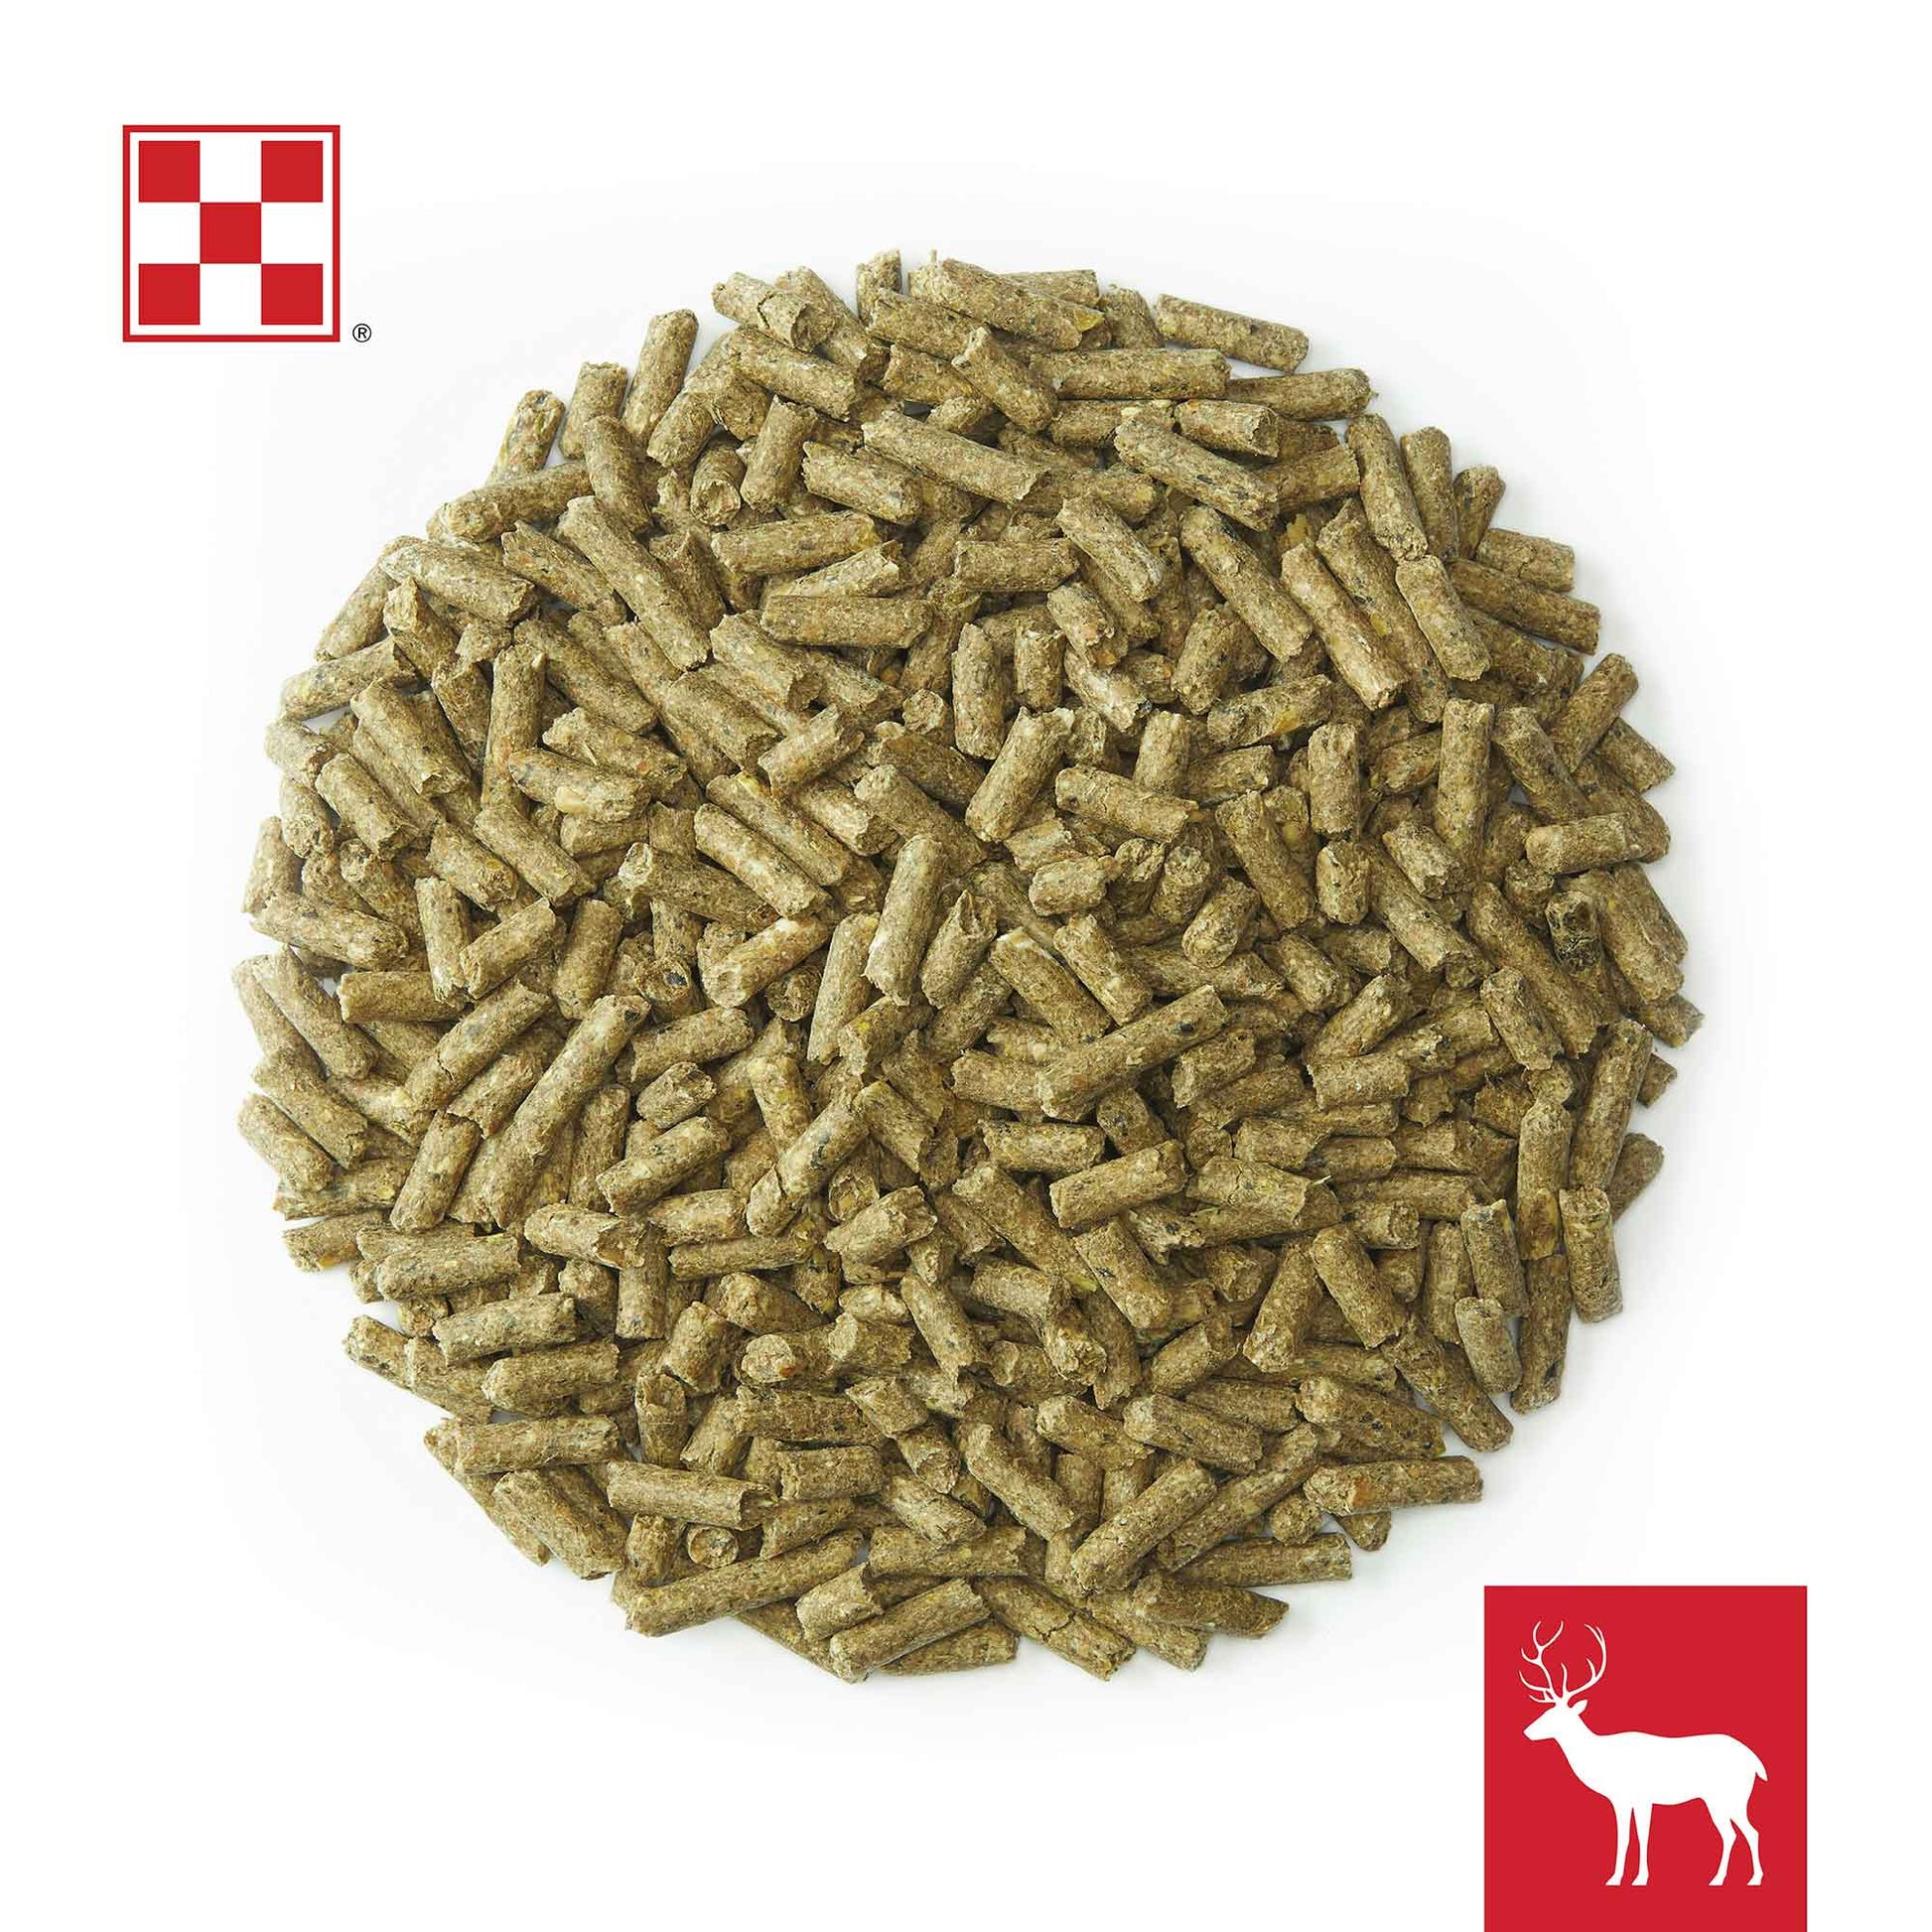 Purina Deer feed on a white background